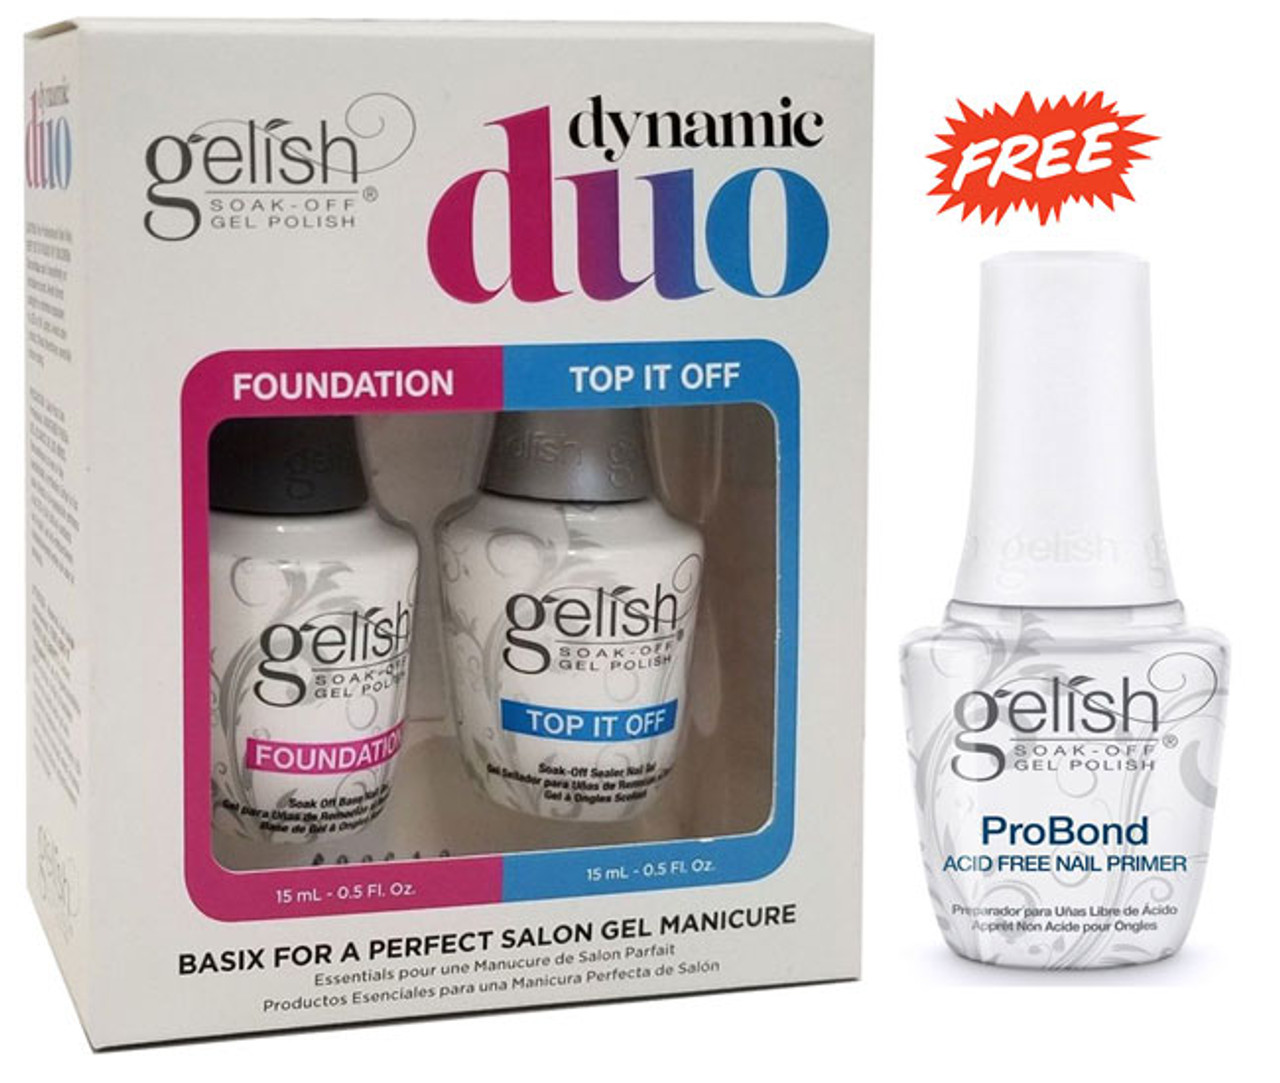 Gelish Dynamic Duo Foundation + Top It Off with Pro Bond FREE